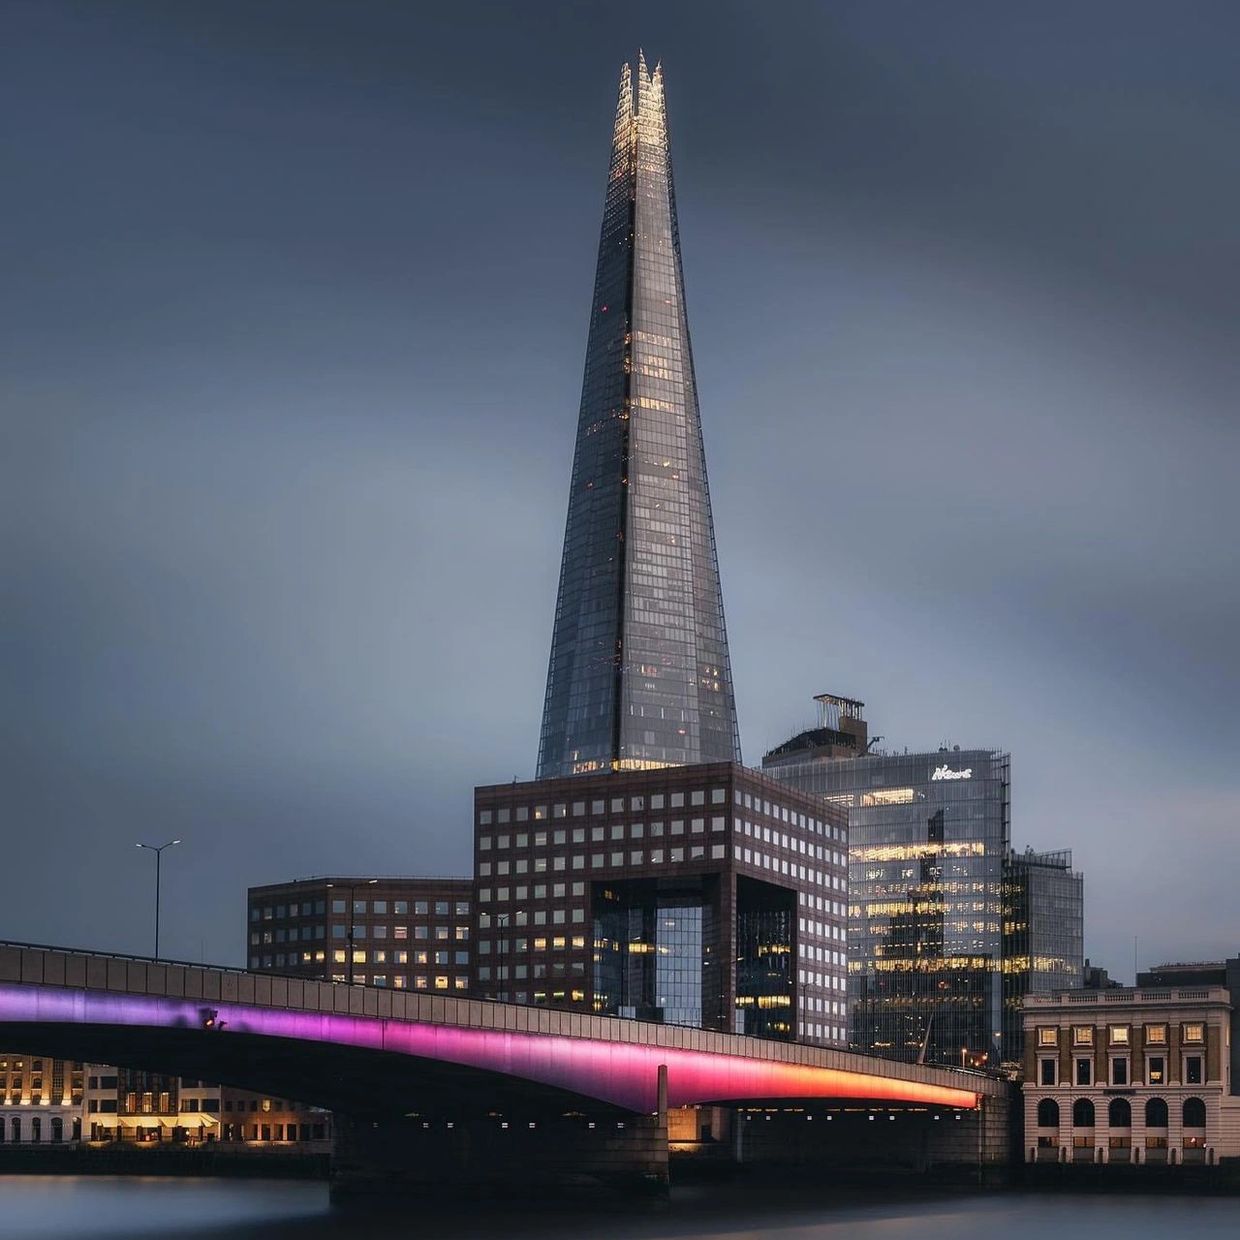 City of London and the Shard at night 